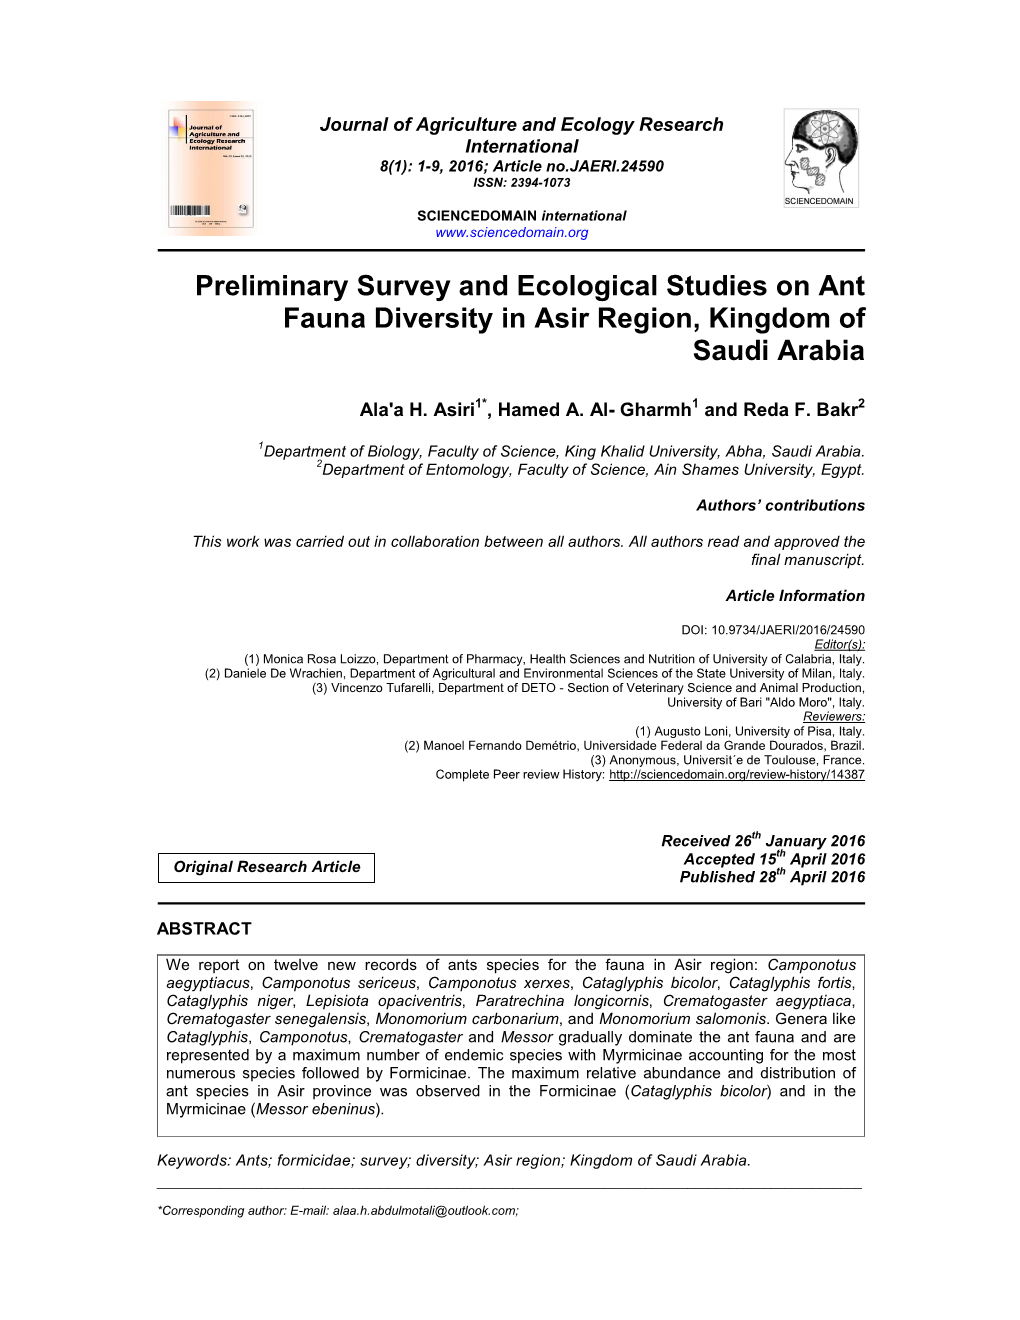 Preliminary Survey and Ecological Studies on Ant Fauna Diversity in Asir Region, Kingdom of Saudi Arabia